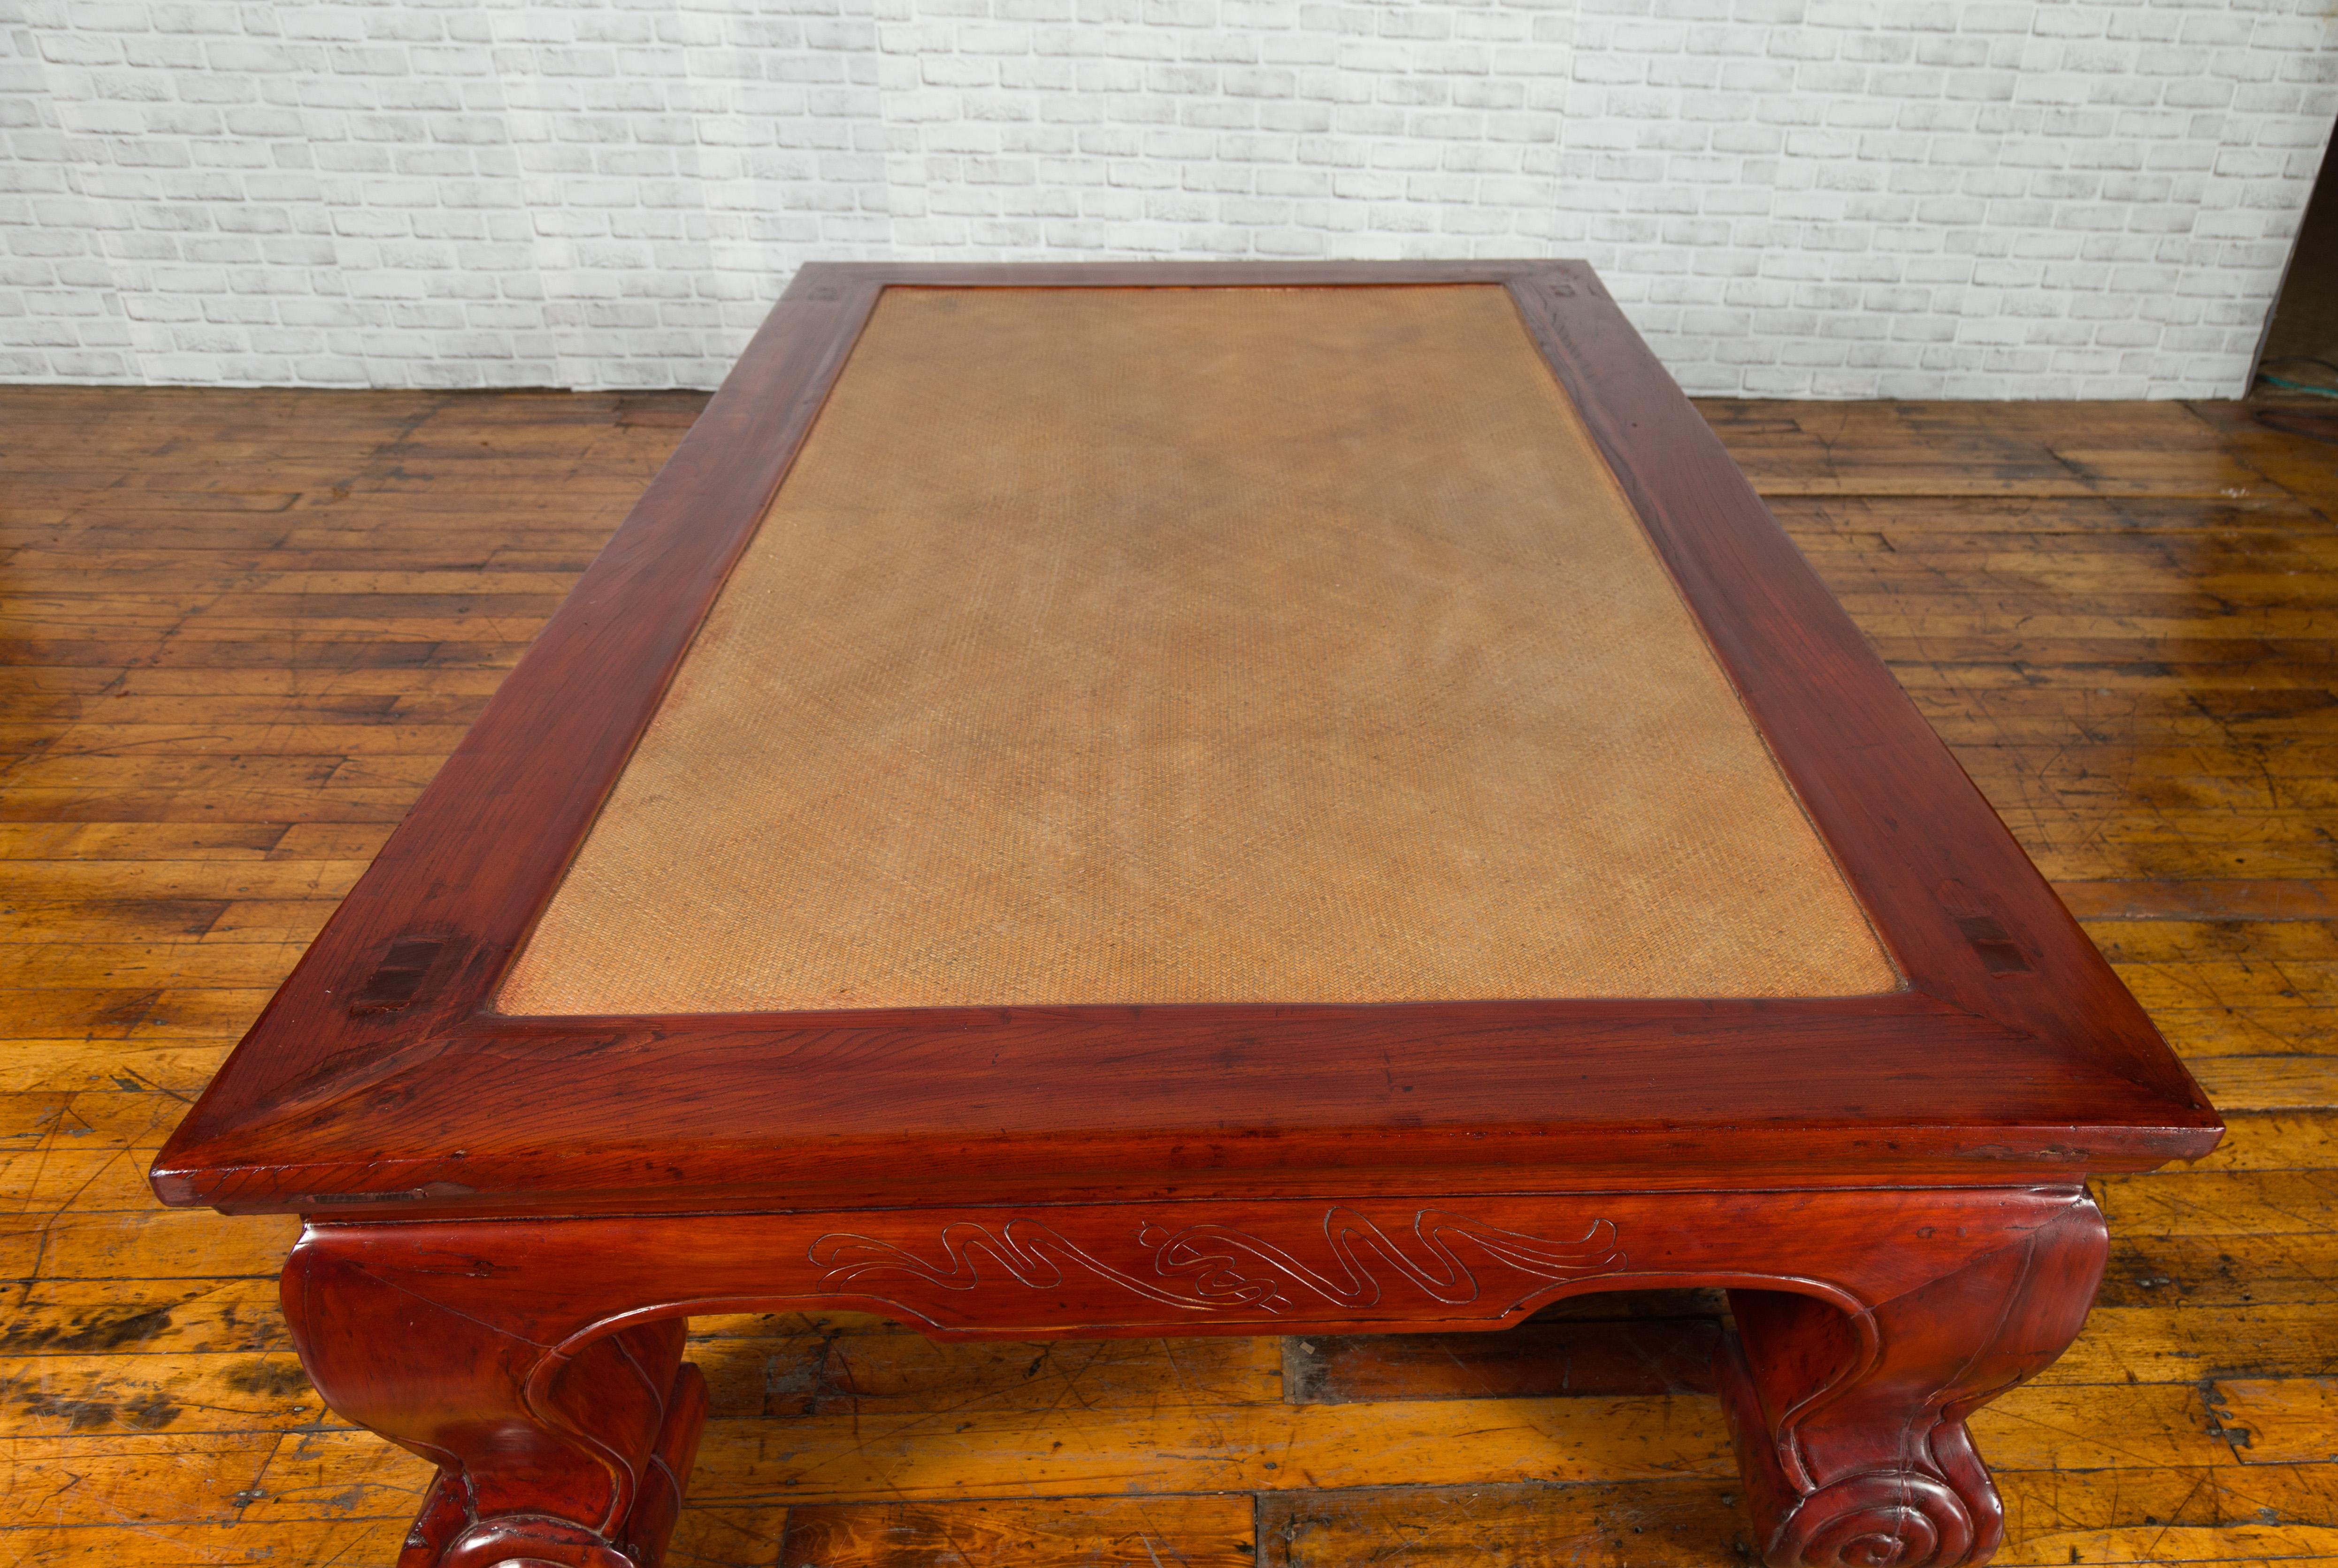 Chinese Qing Dynasty 19th Century Opium Mat Coffee Table with Woven Rattan Top 9